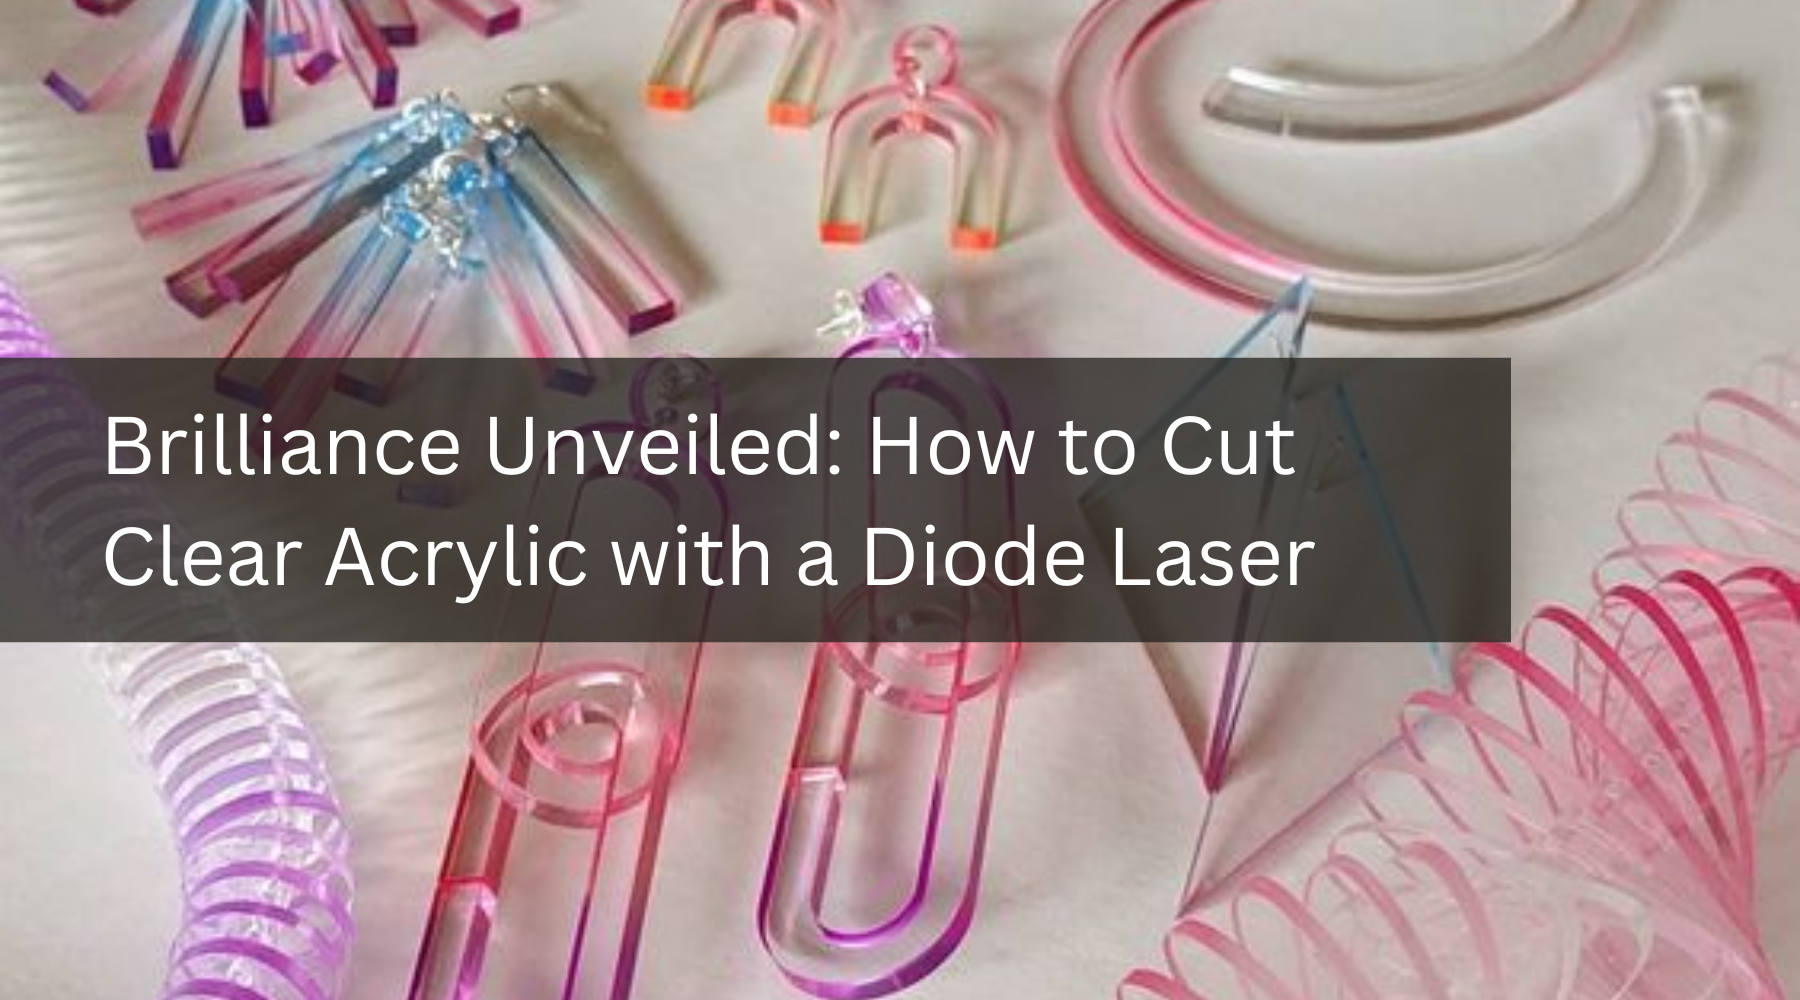 Brilliance Unveiled: How to Cut Clear Acrylic with a Diode Laser